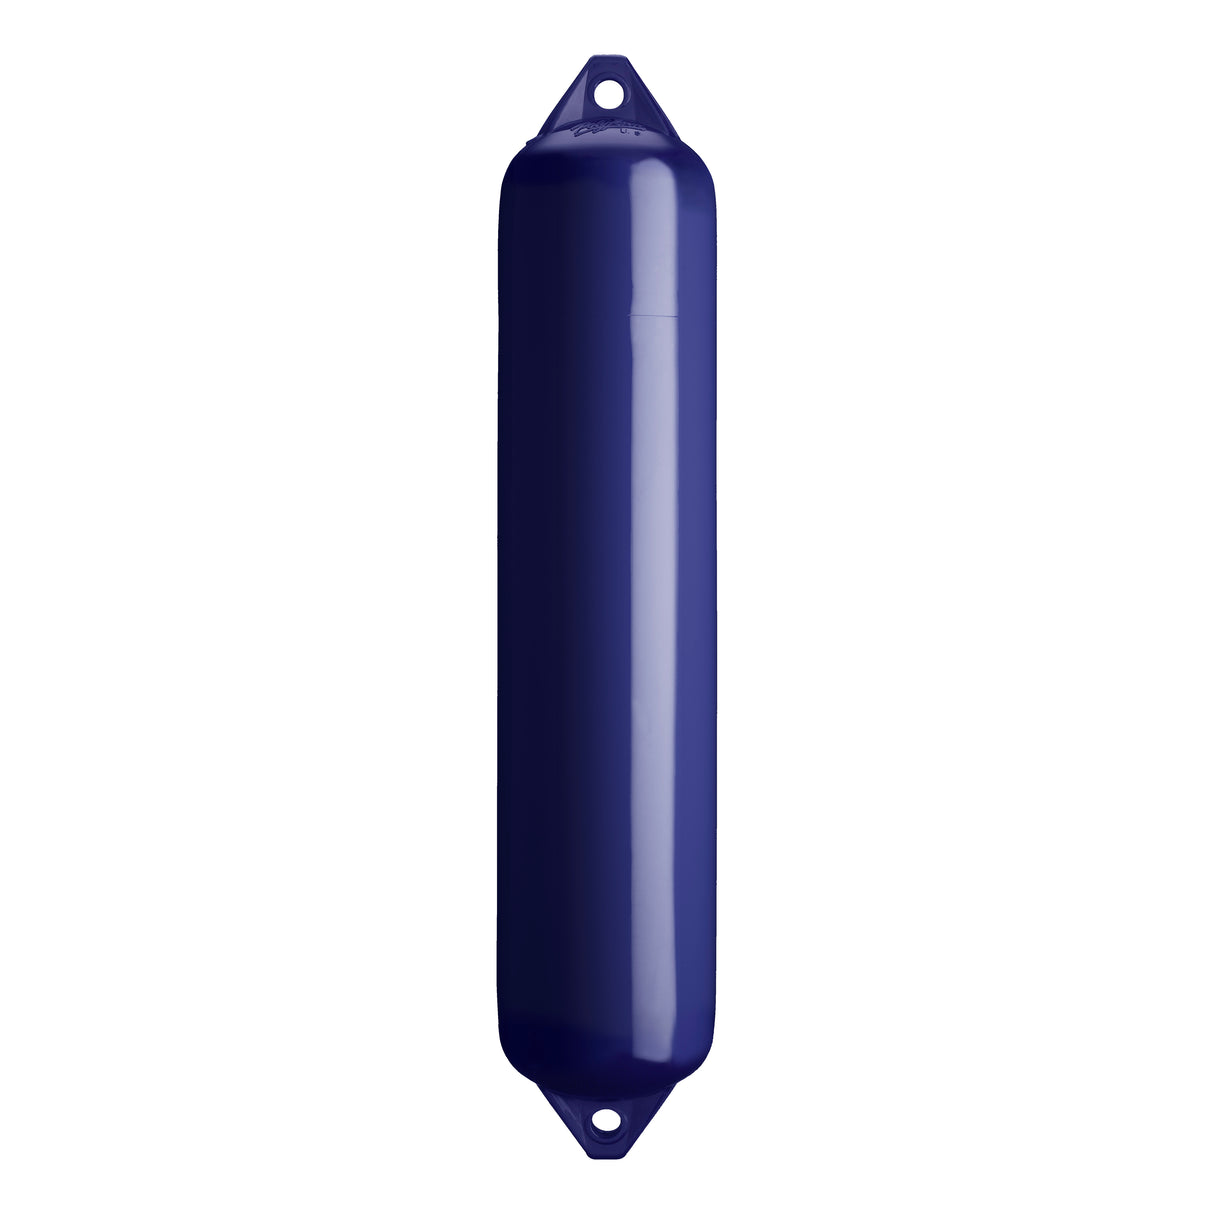 Navy Blue boat fender with Navy-Top, Polyform F-4 